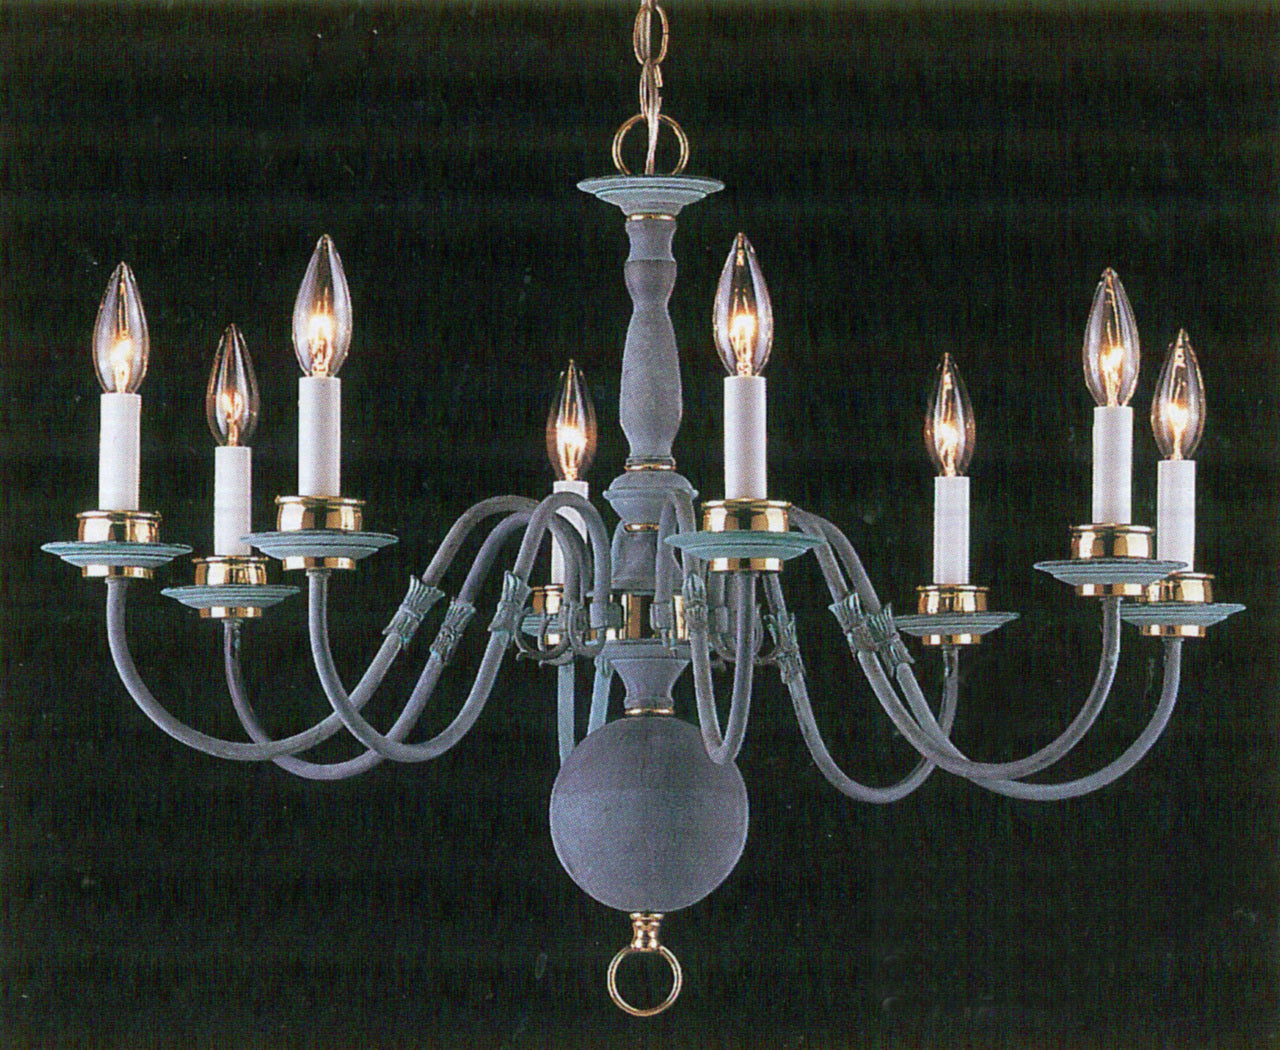 Classic Lighting 6768 V/PB Classic Willaimsburgs Traditional Chandelier in Verde with Polished Brass Accents